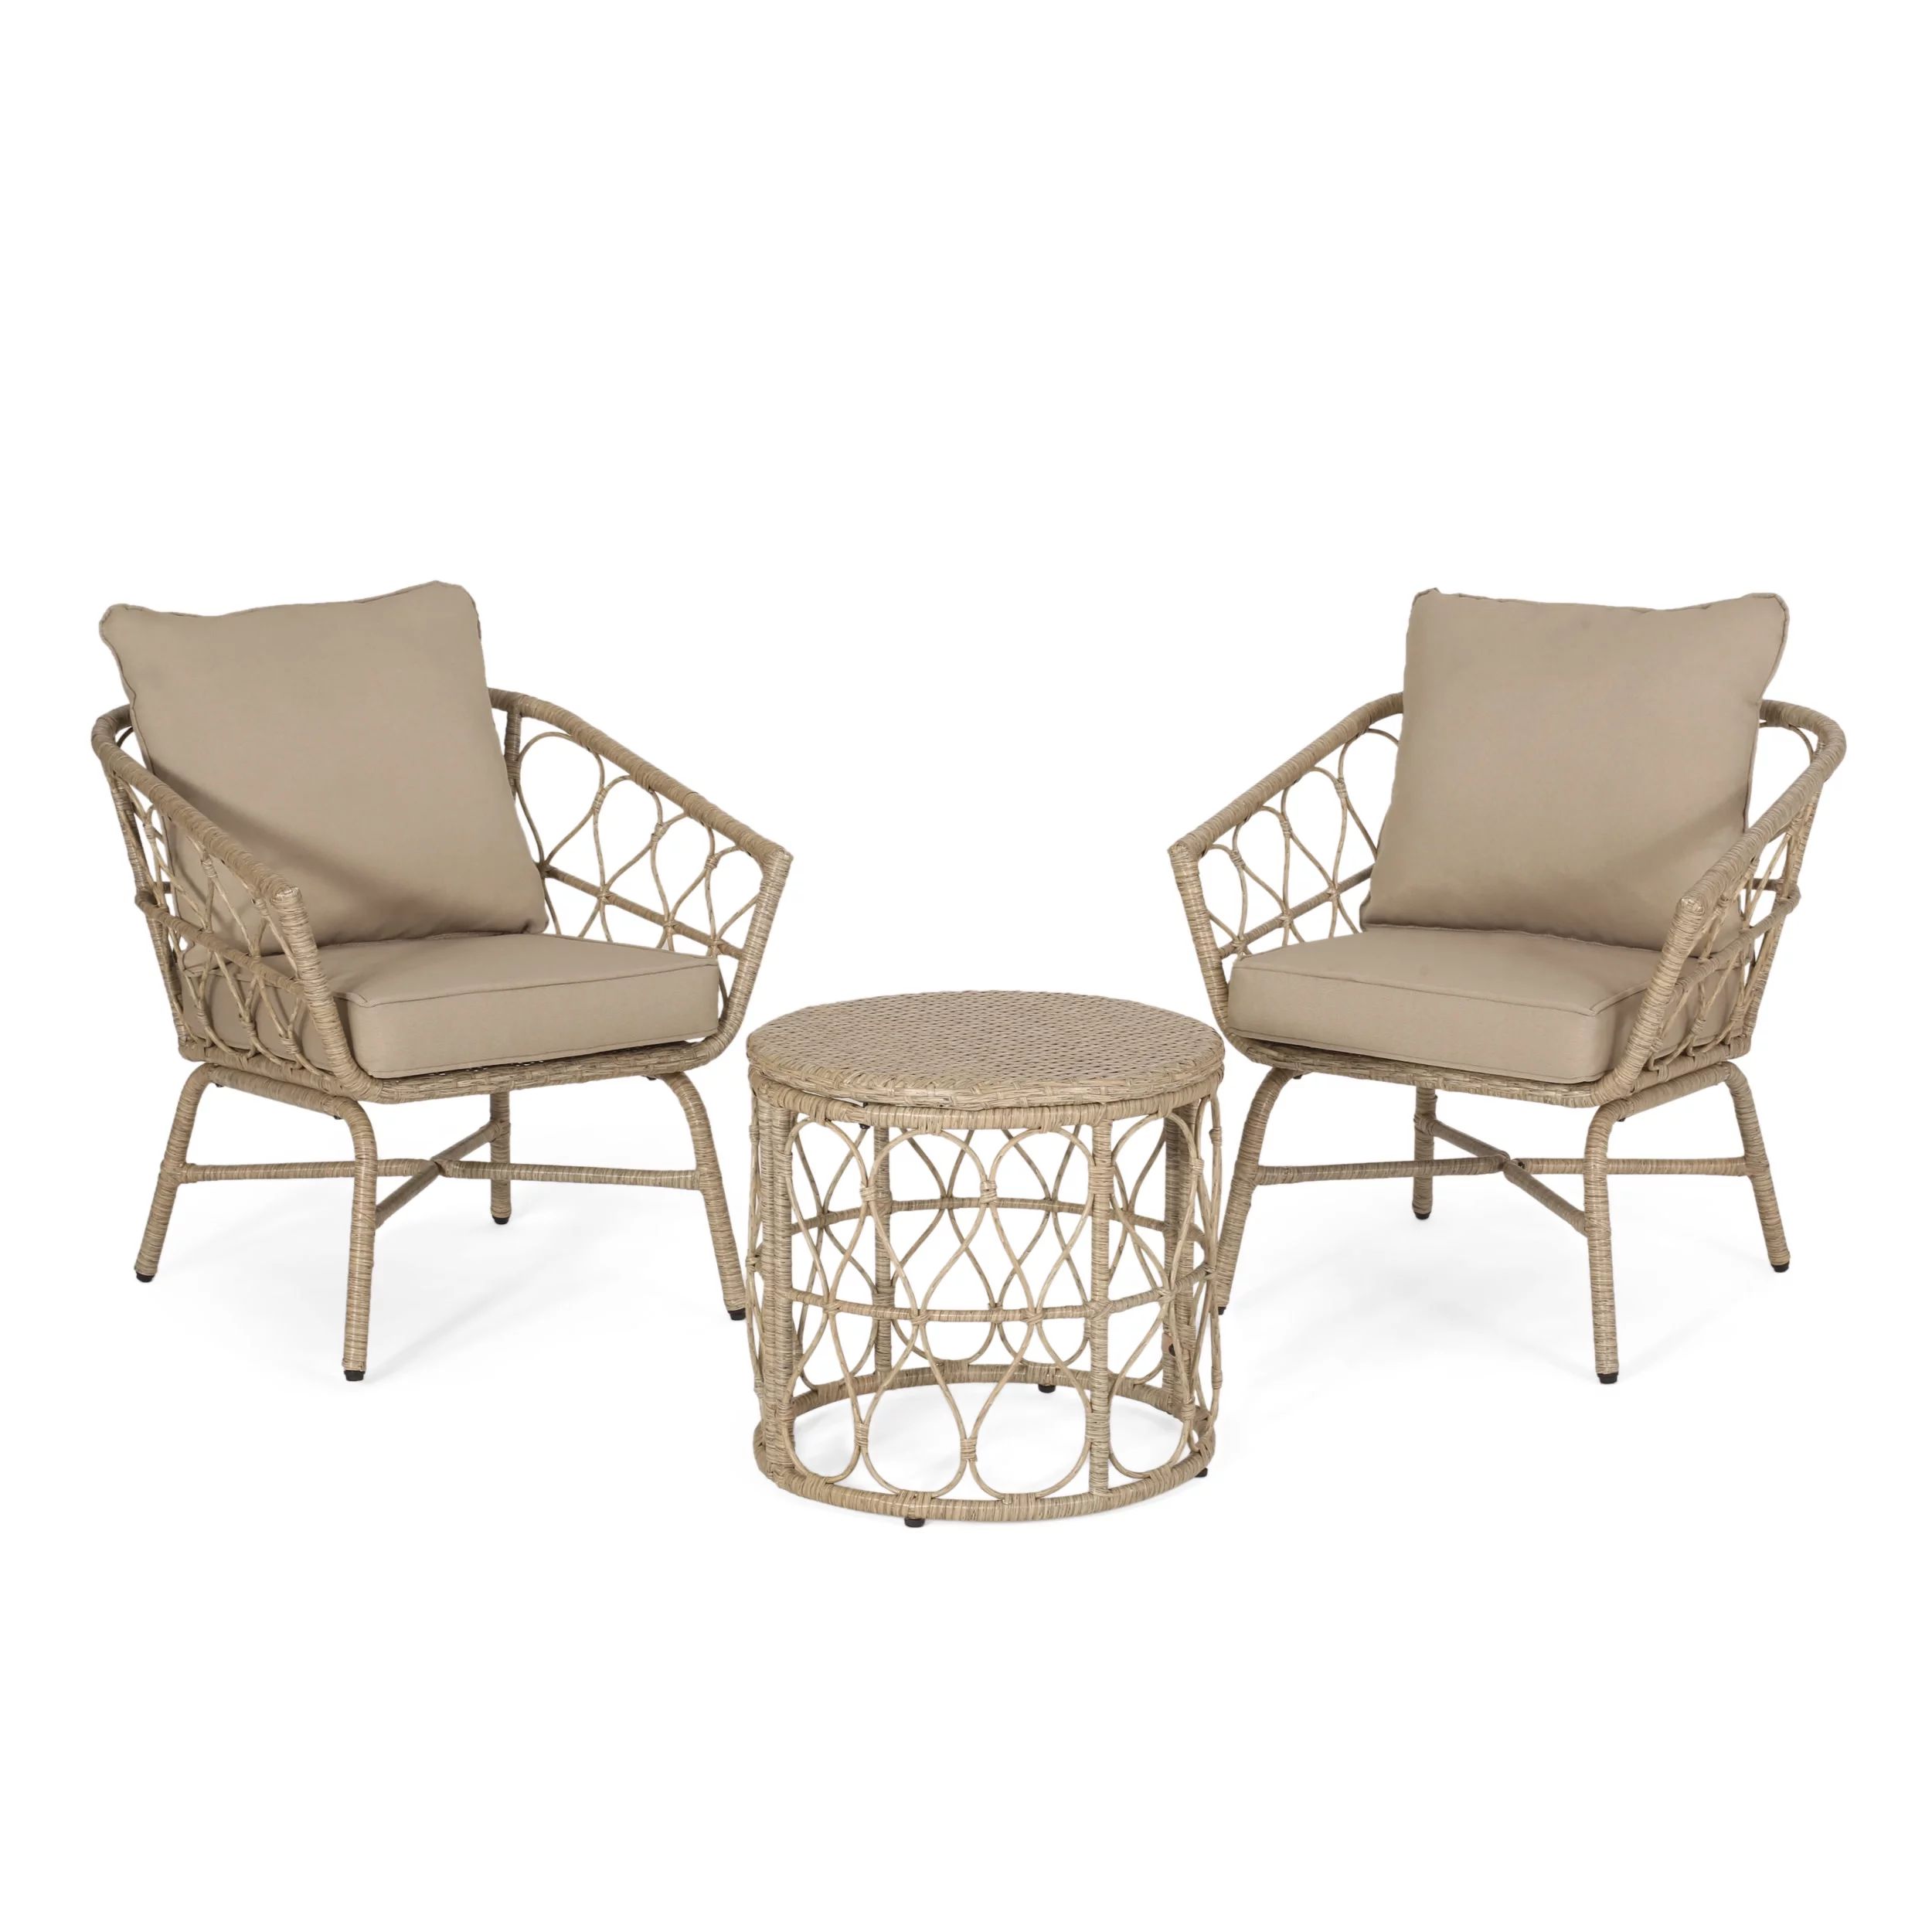 GDF Studio Colmar Outdoor Wicker 3 Piece Chat Set with Cushions, Light Brown and Beige | Walmart (US)